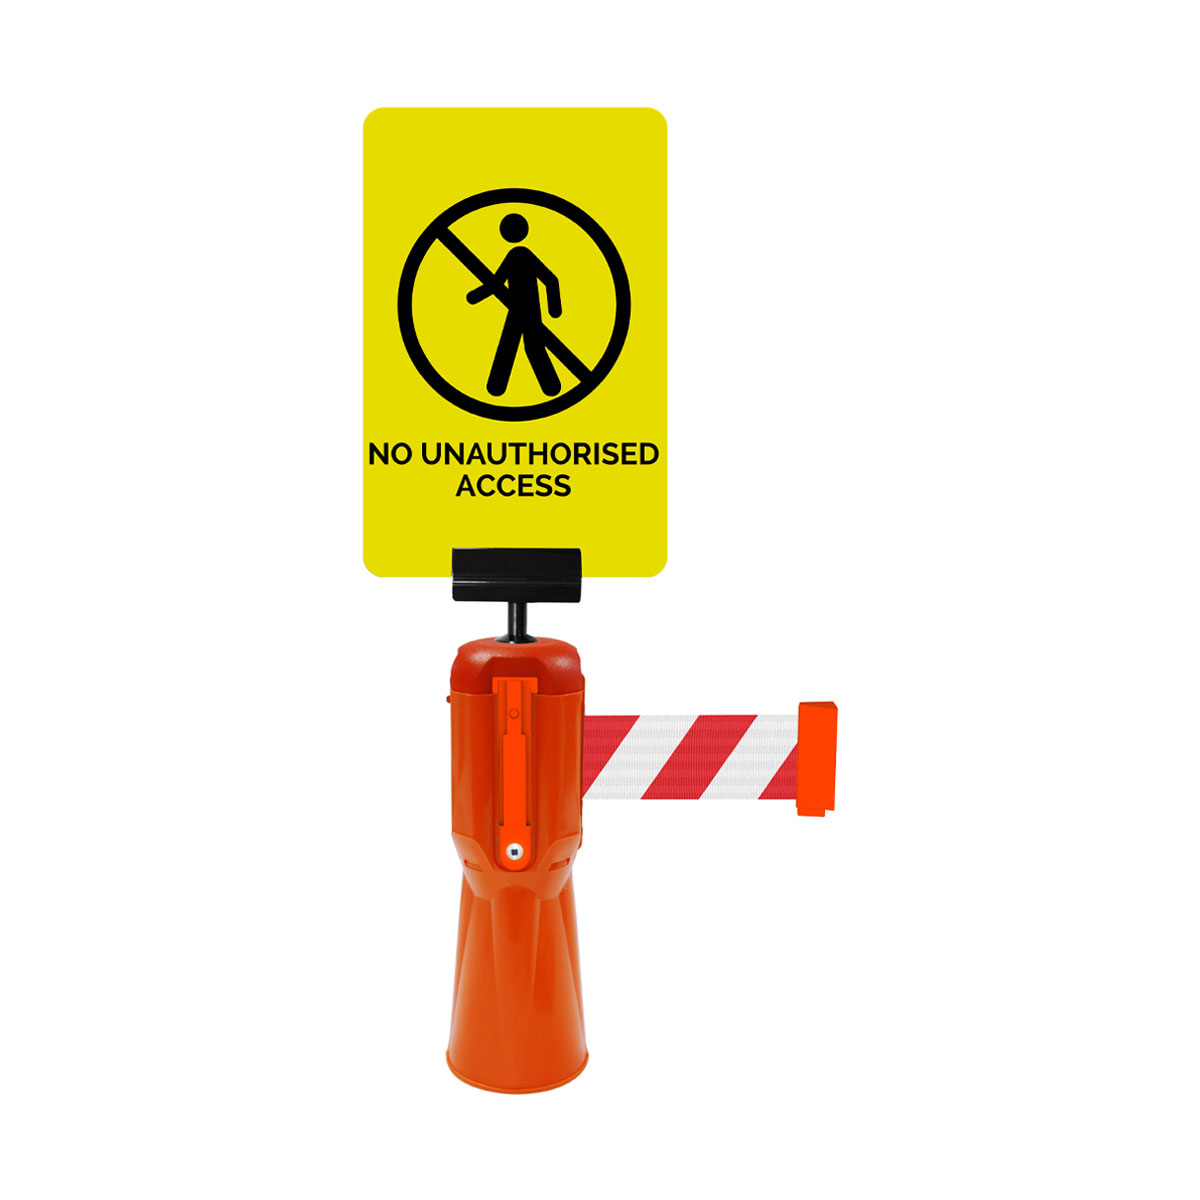 Tensa Traffic Cone Topper Forms an Instant Safety Barrier Using Existing Traffic Cones